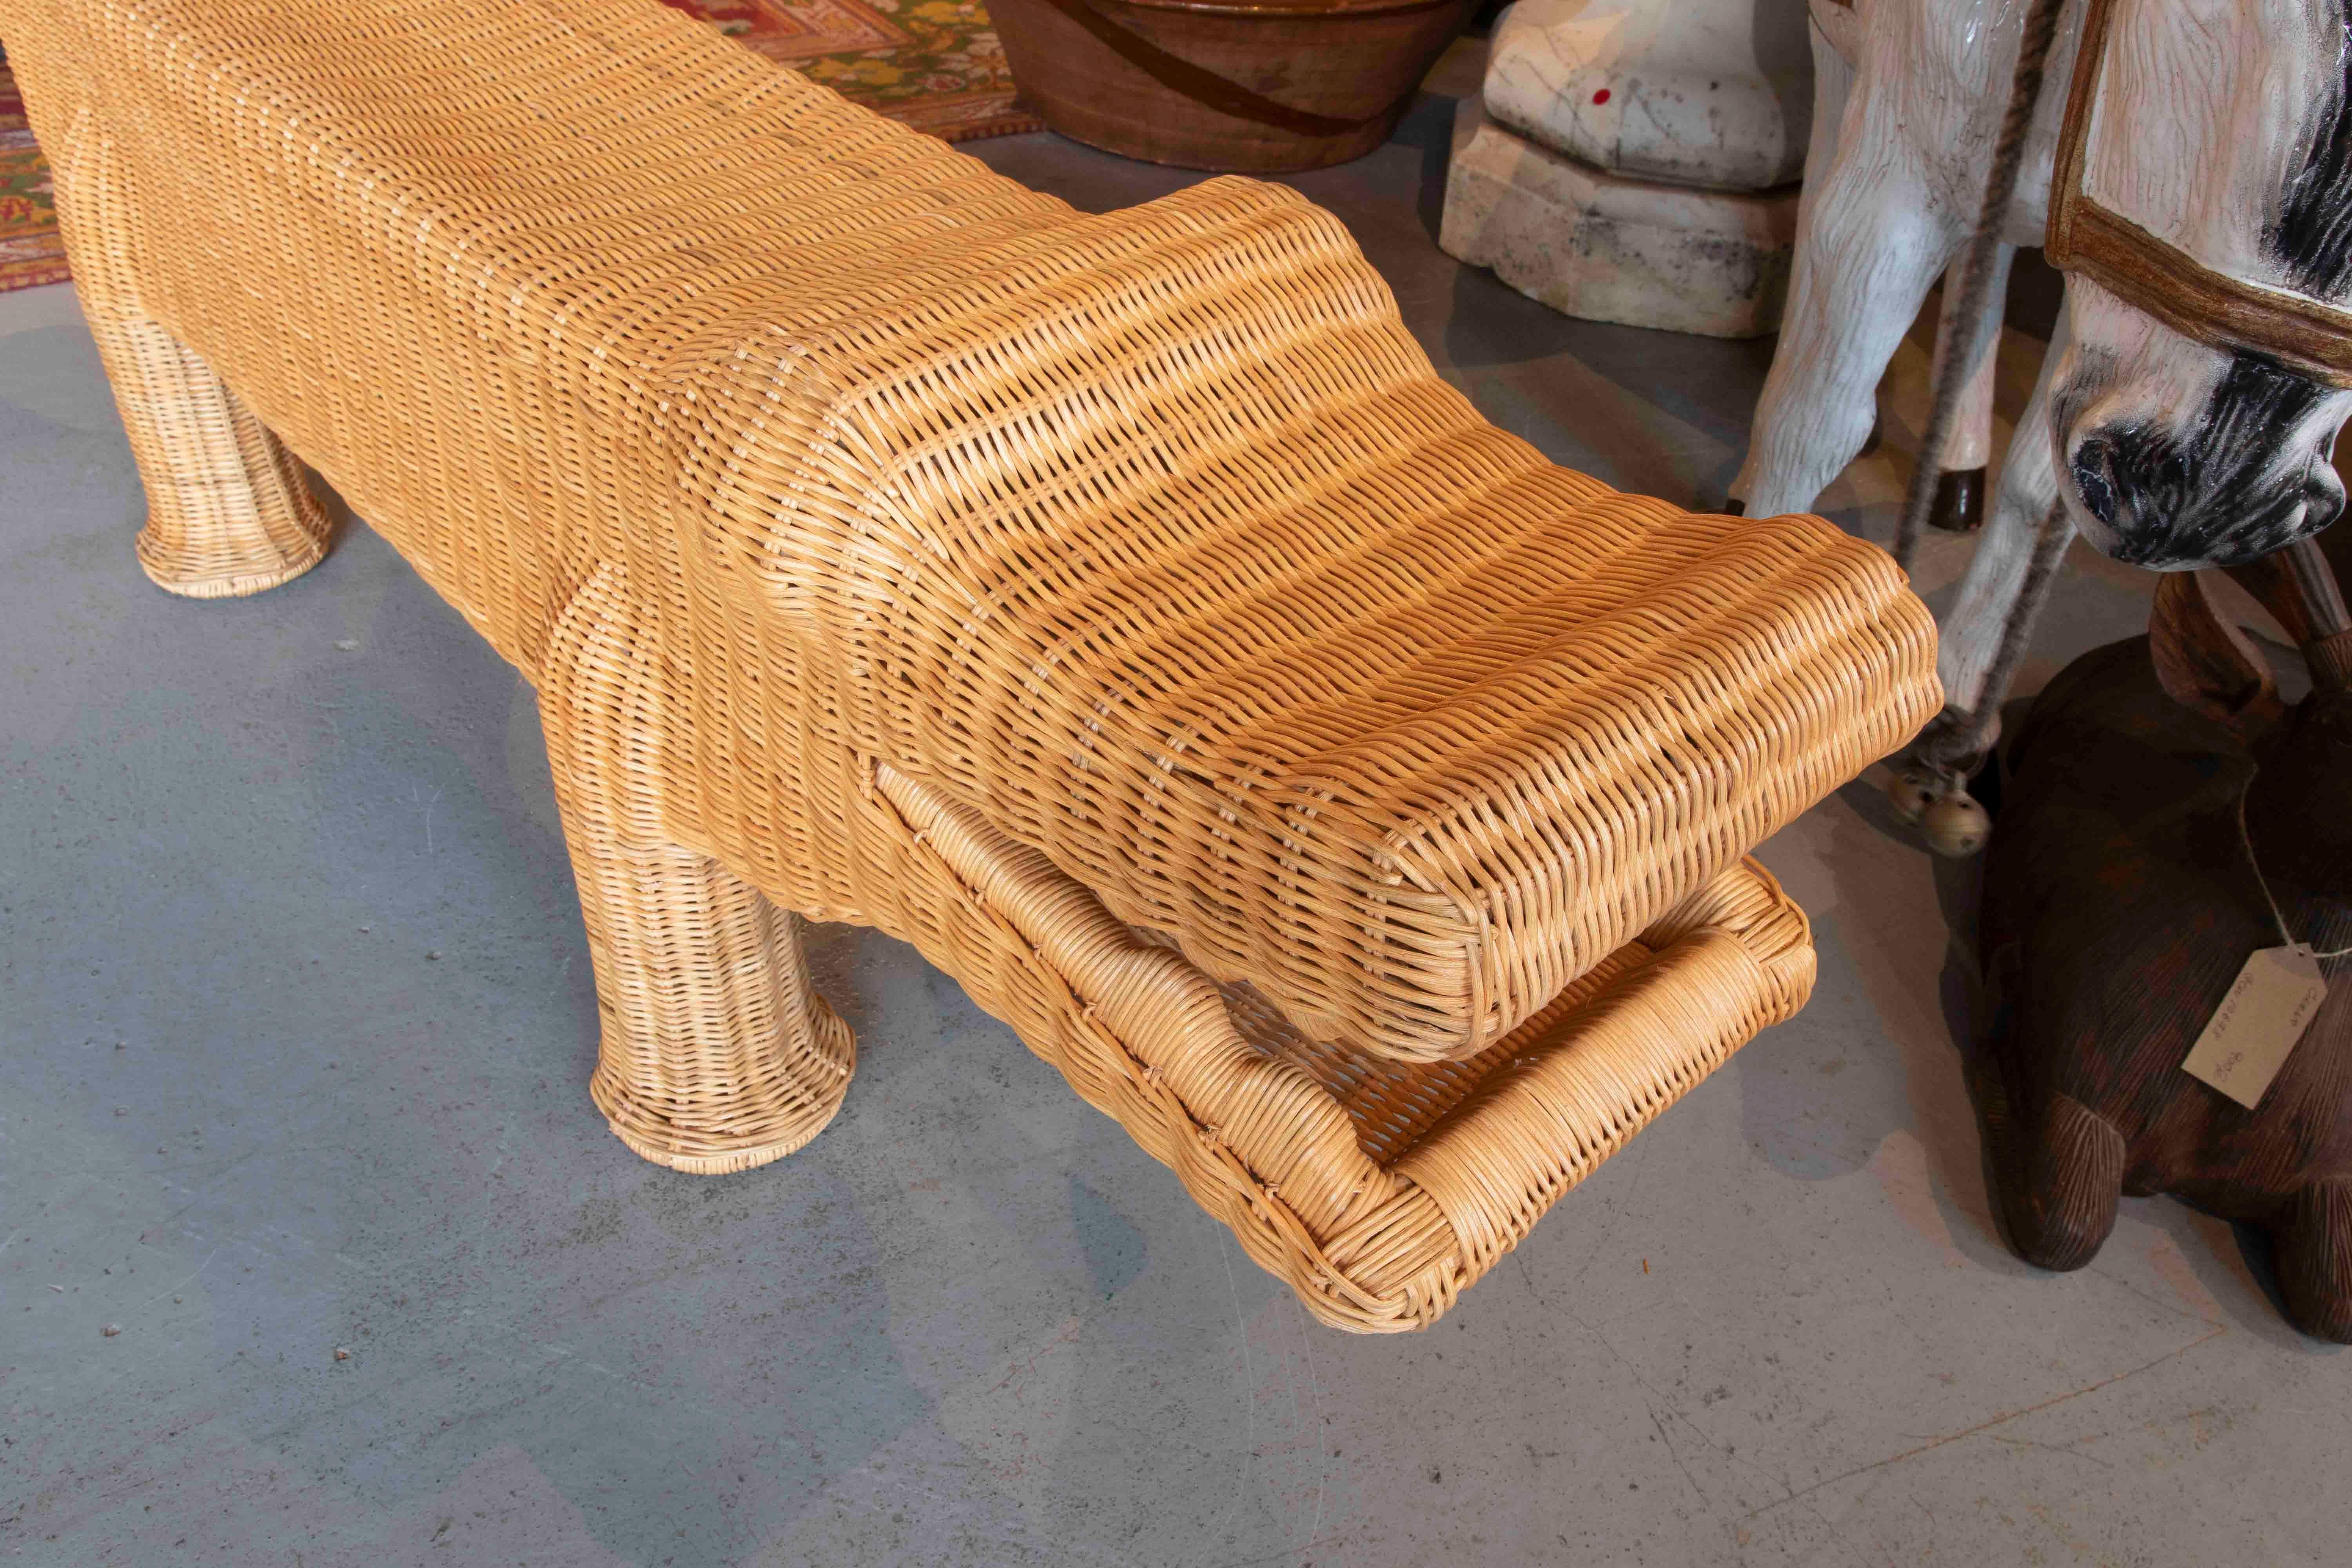 Contemporary Crocodile Bench Made of Wicker with Iron Structure in Brown Tone